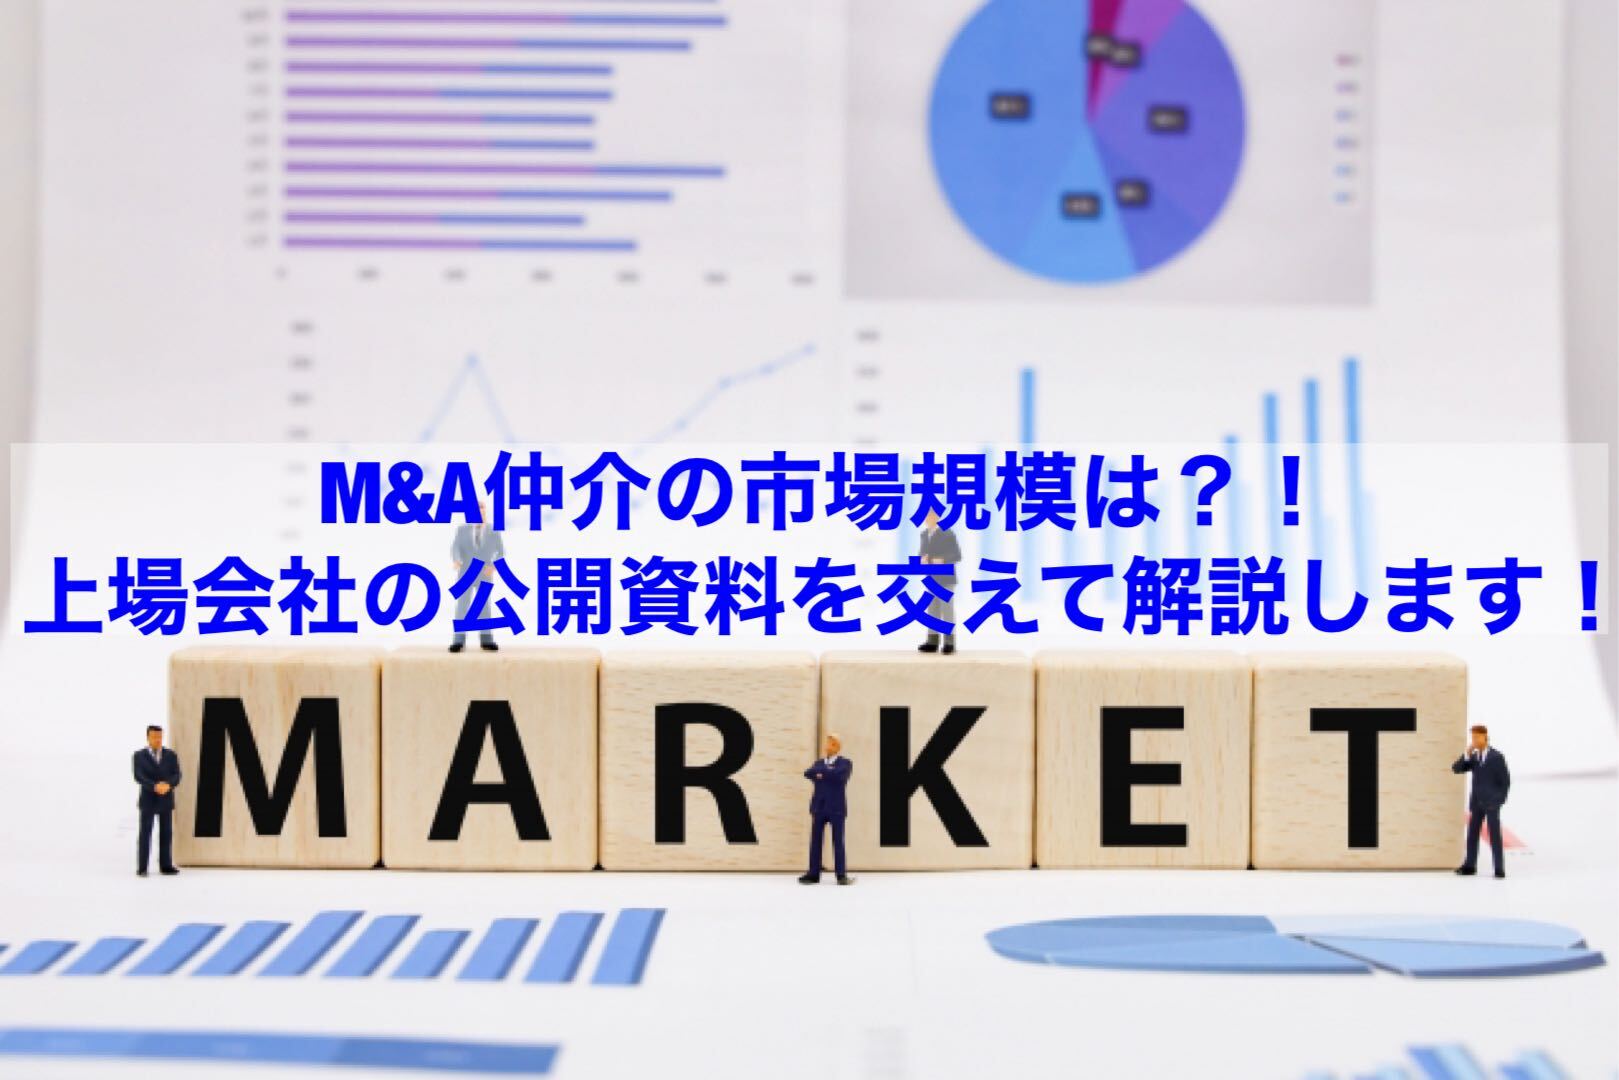 You are currently viewing 【転職情報】M＆A仲介の市場規模は？！上場会社の公開資料を交えて解説します！